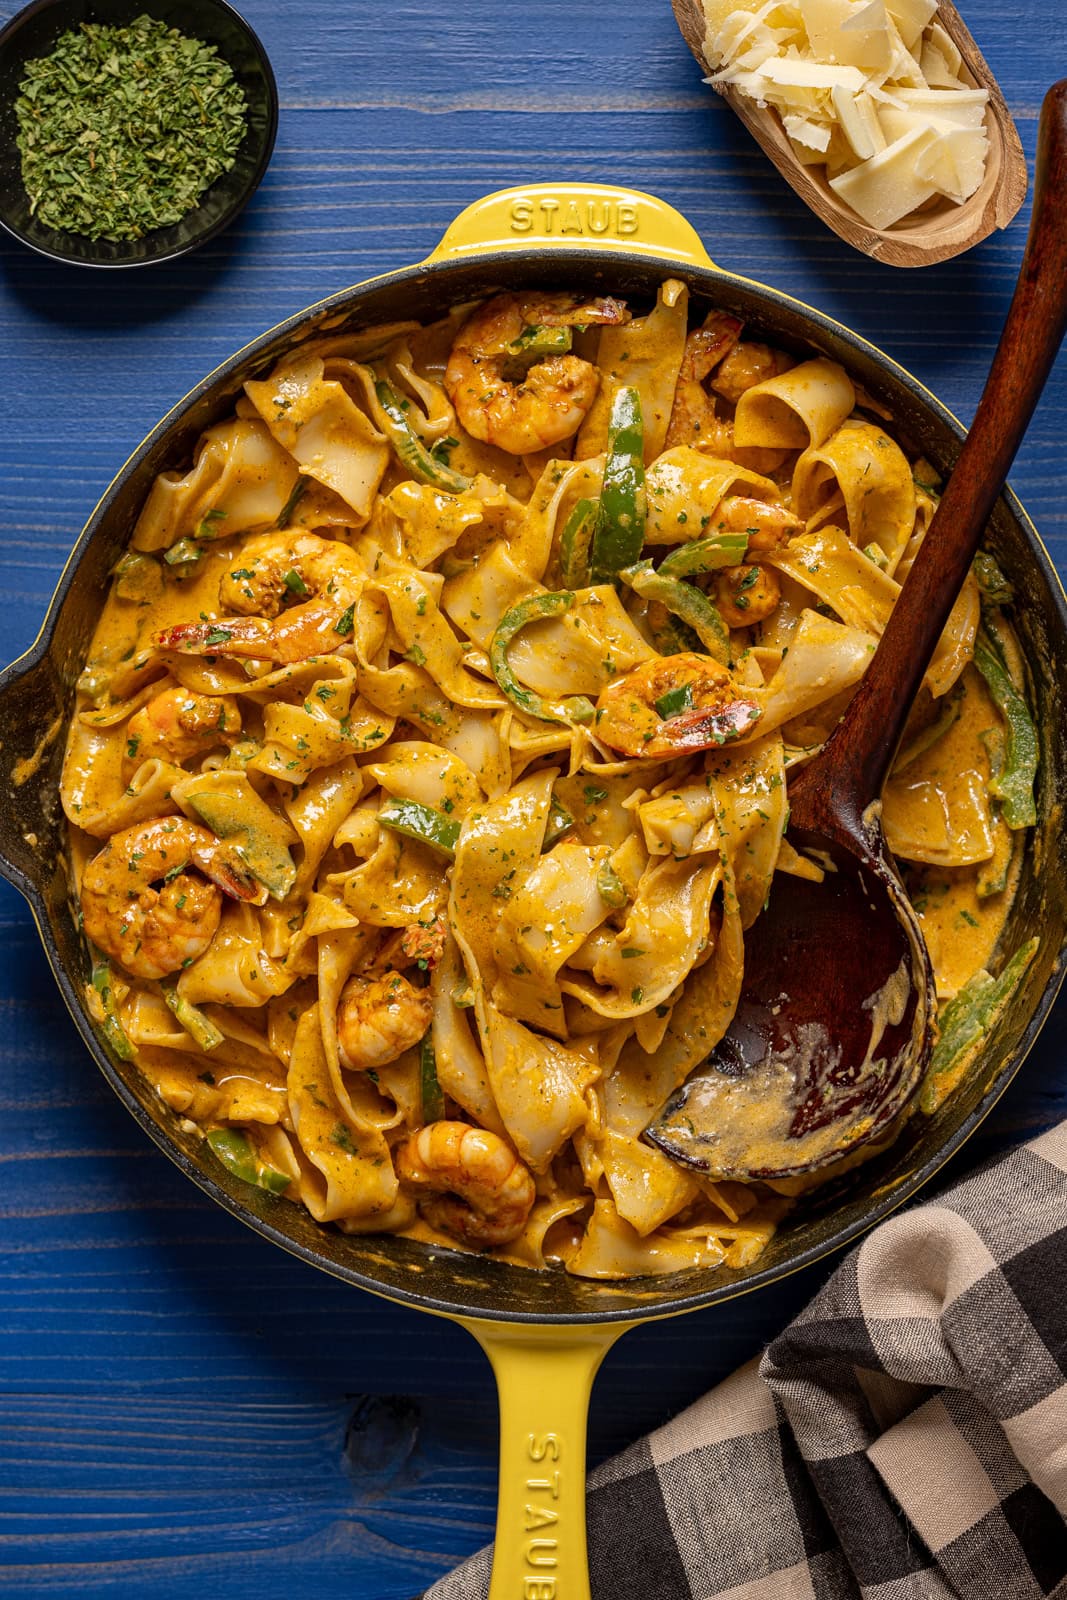 Shrimp pasta in a yellow skillet with a wooden spoon on a blue wood table.